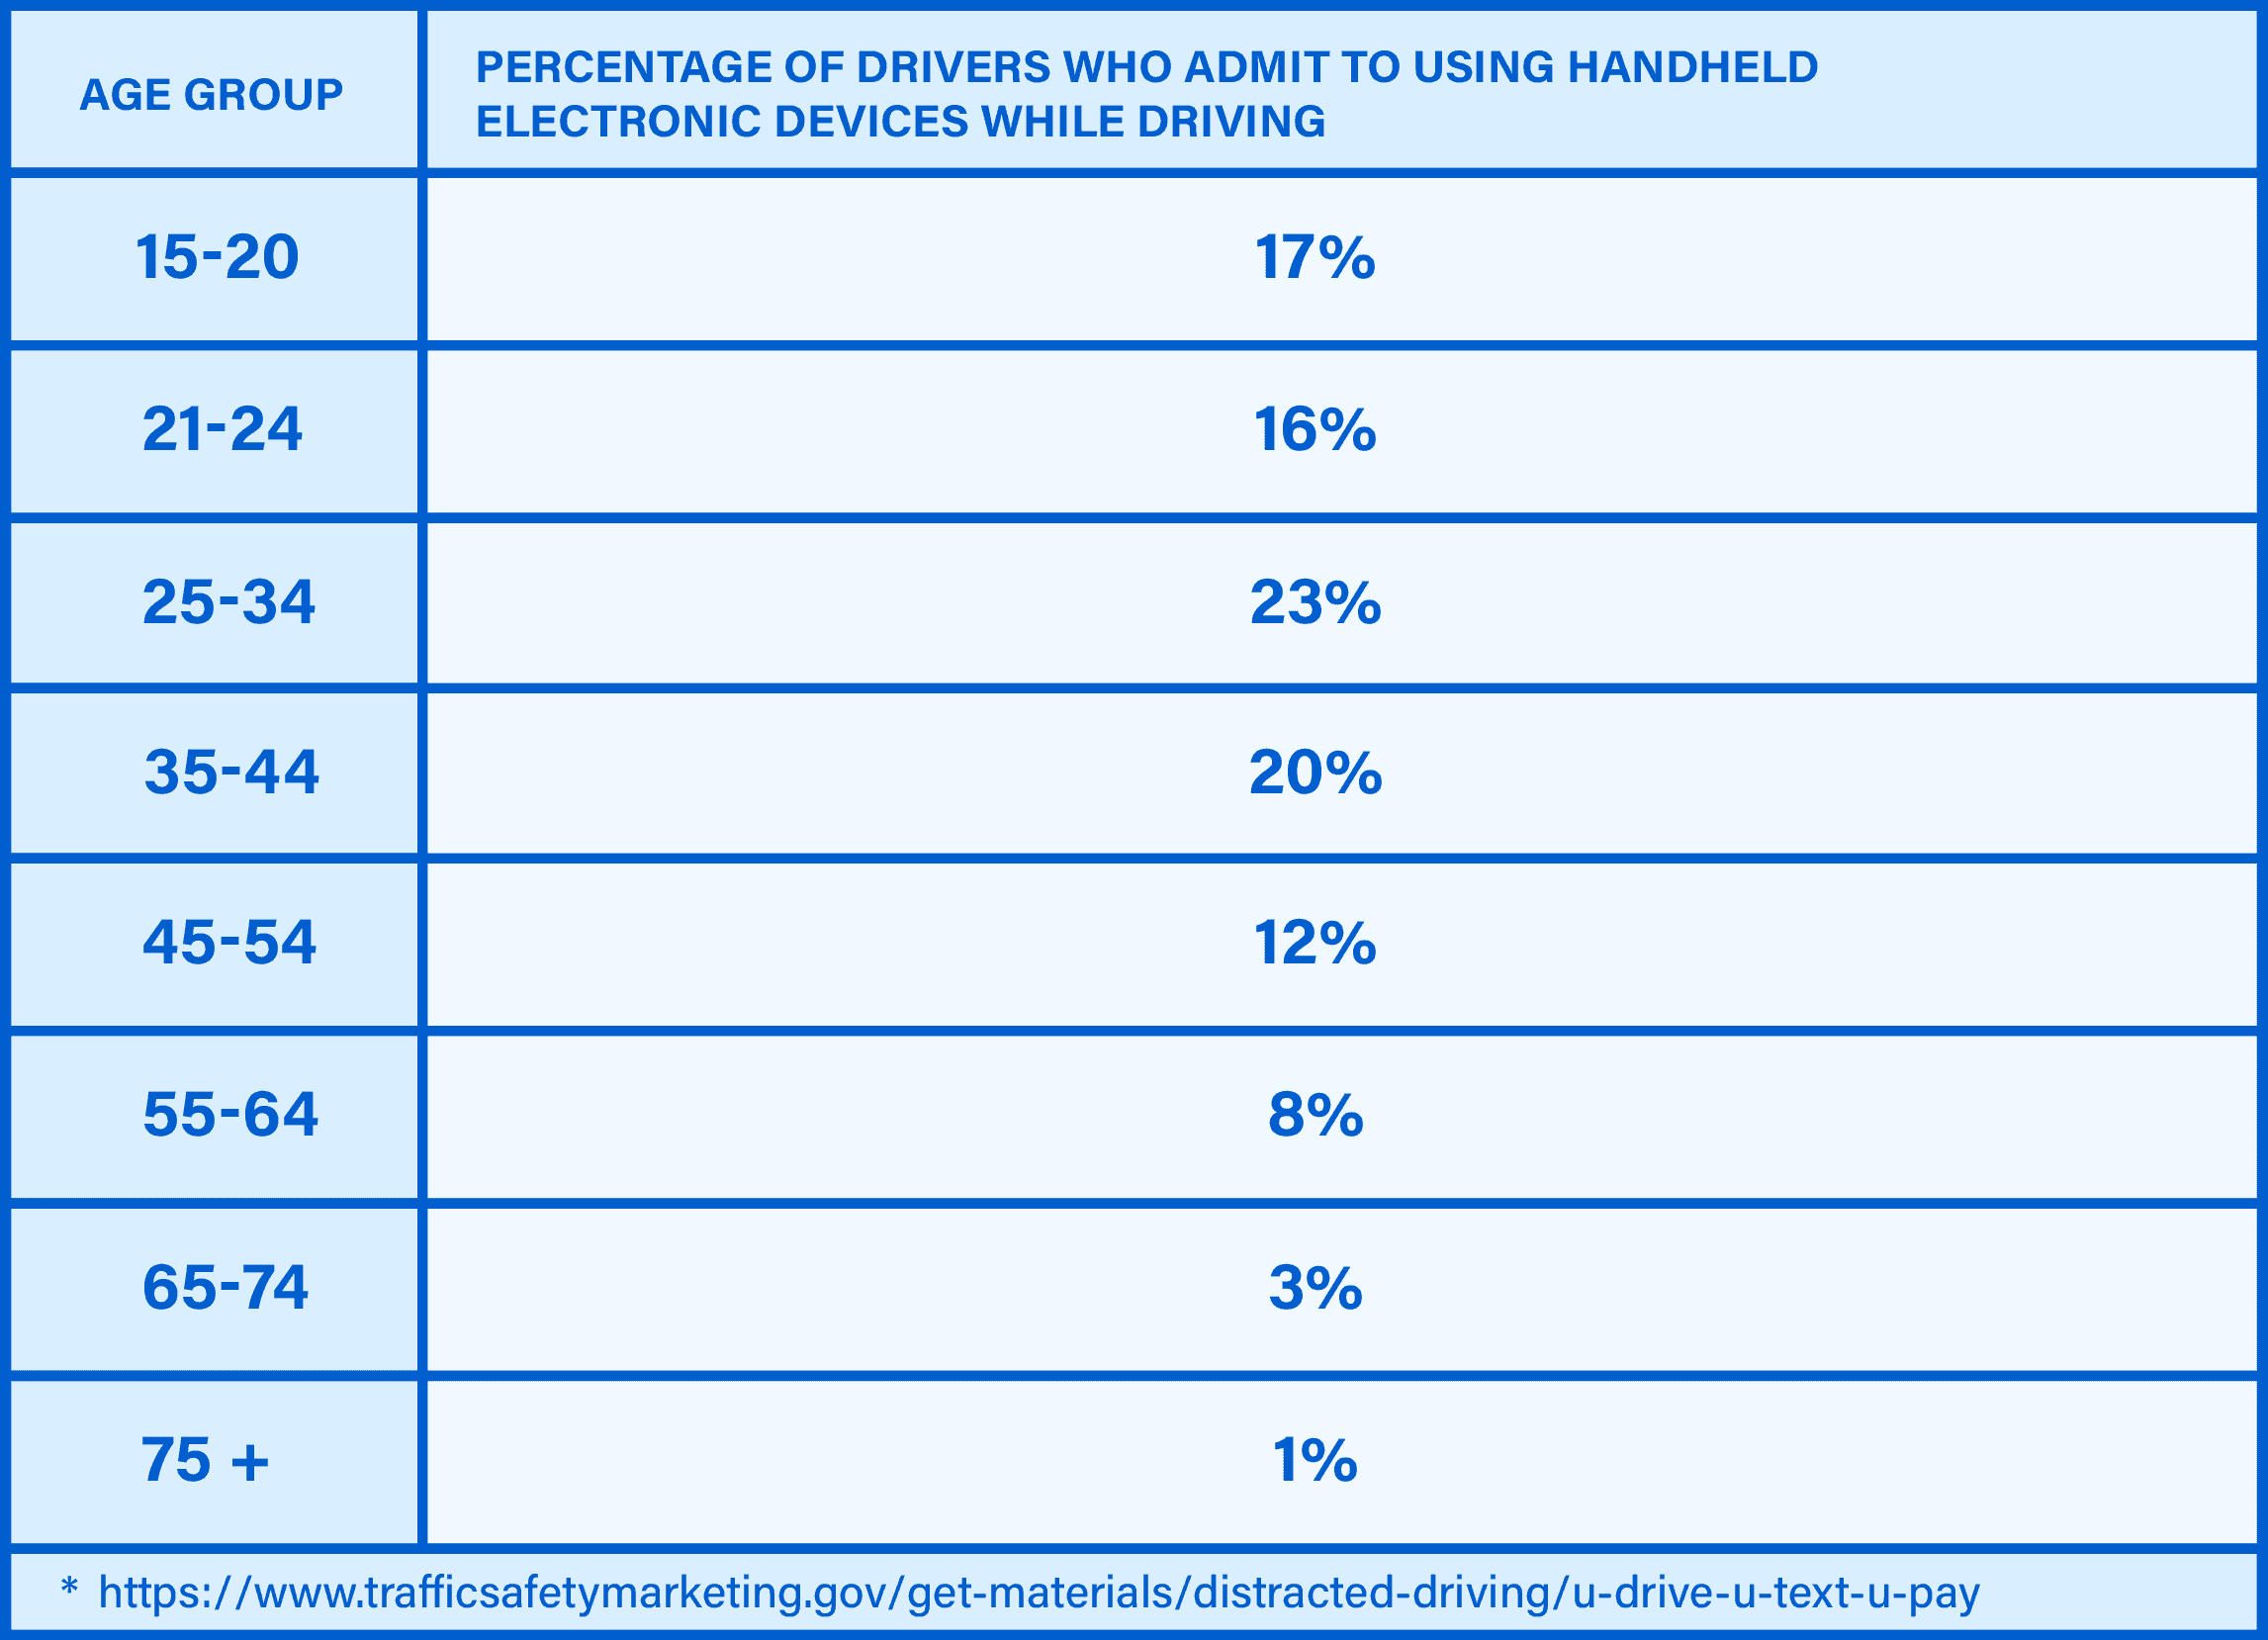 Percentage of drivers who admit to using handheld electronic devices while driving